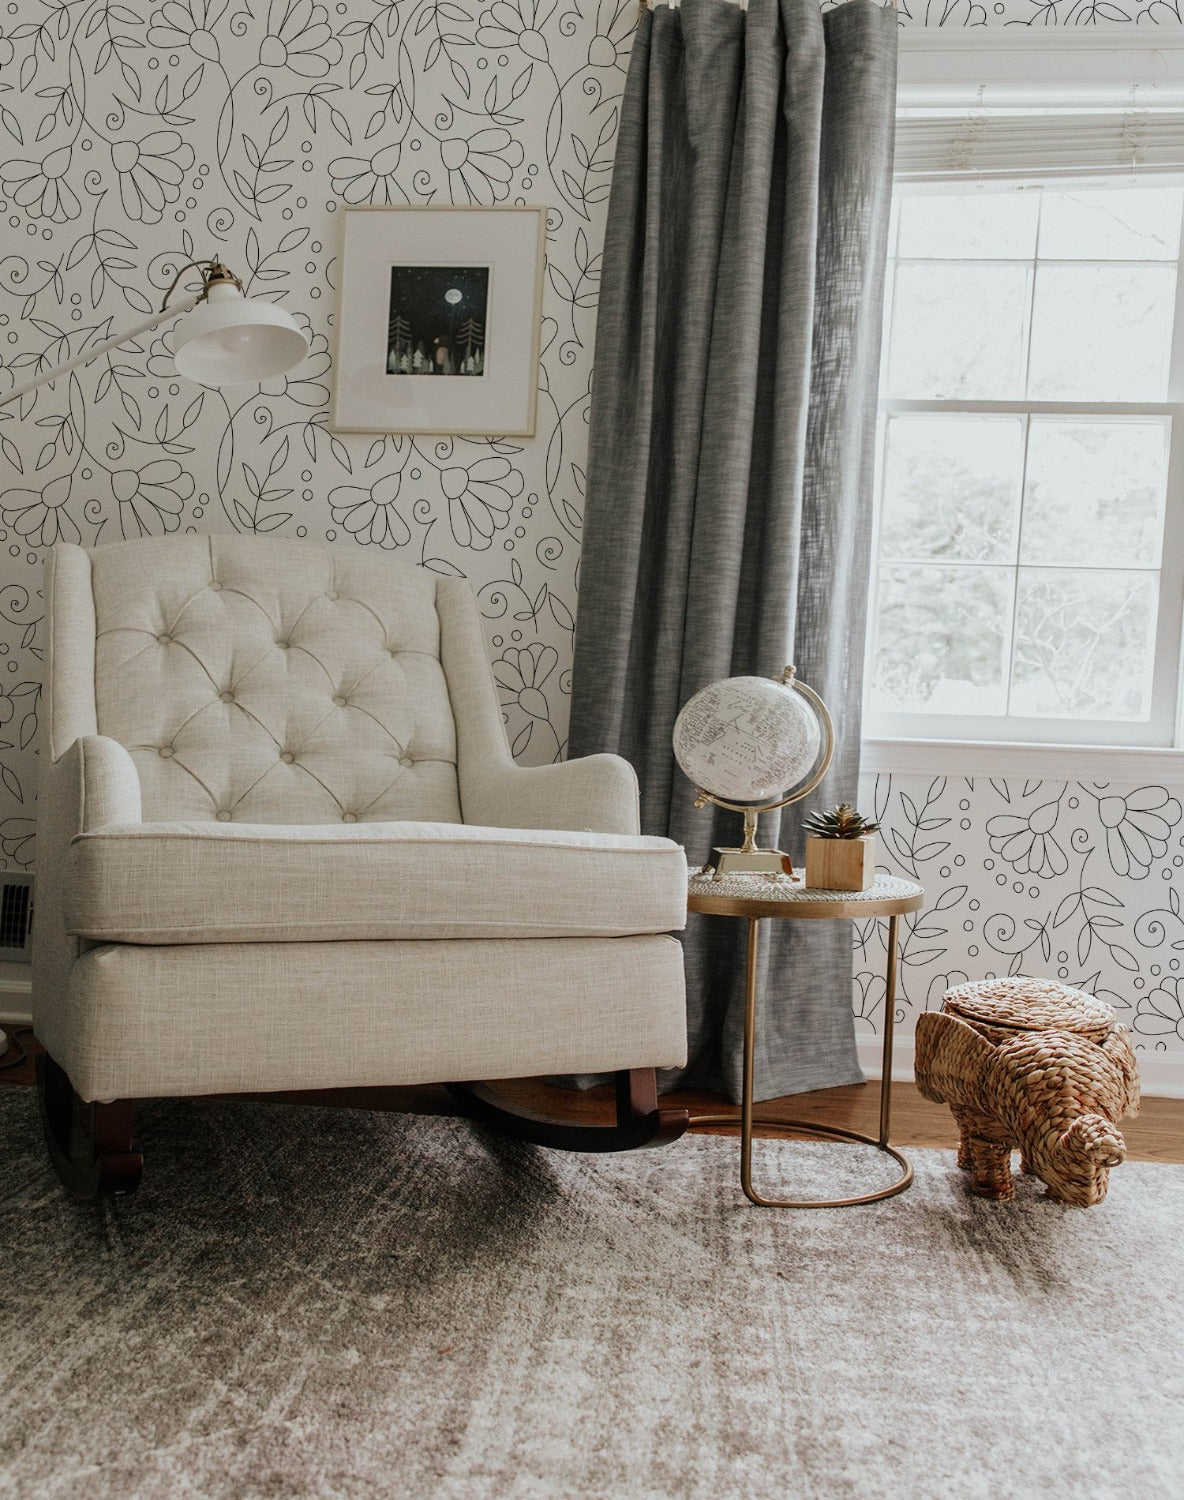 A cozy reading corner with the Simple Black Floral Wallpaper accentuating the wall behind a tufted beige armchair, a rustic globe table lamp, and wicker animal-shaped basket, creating a charming and inviting space